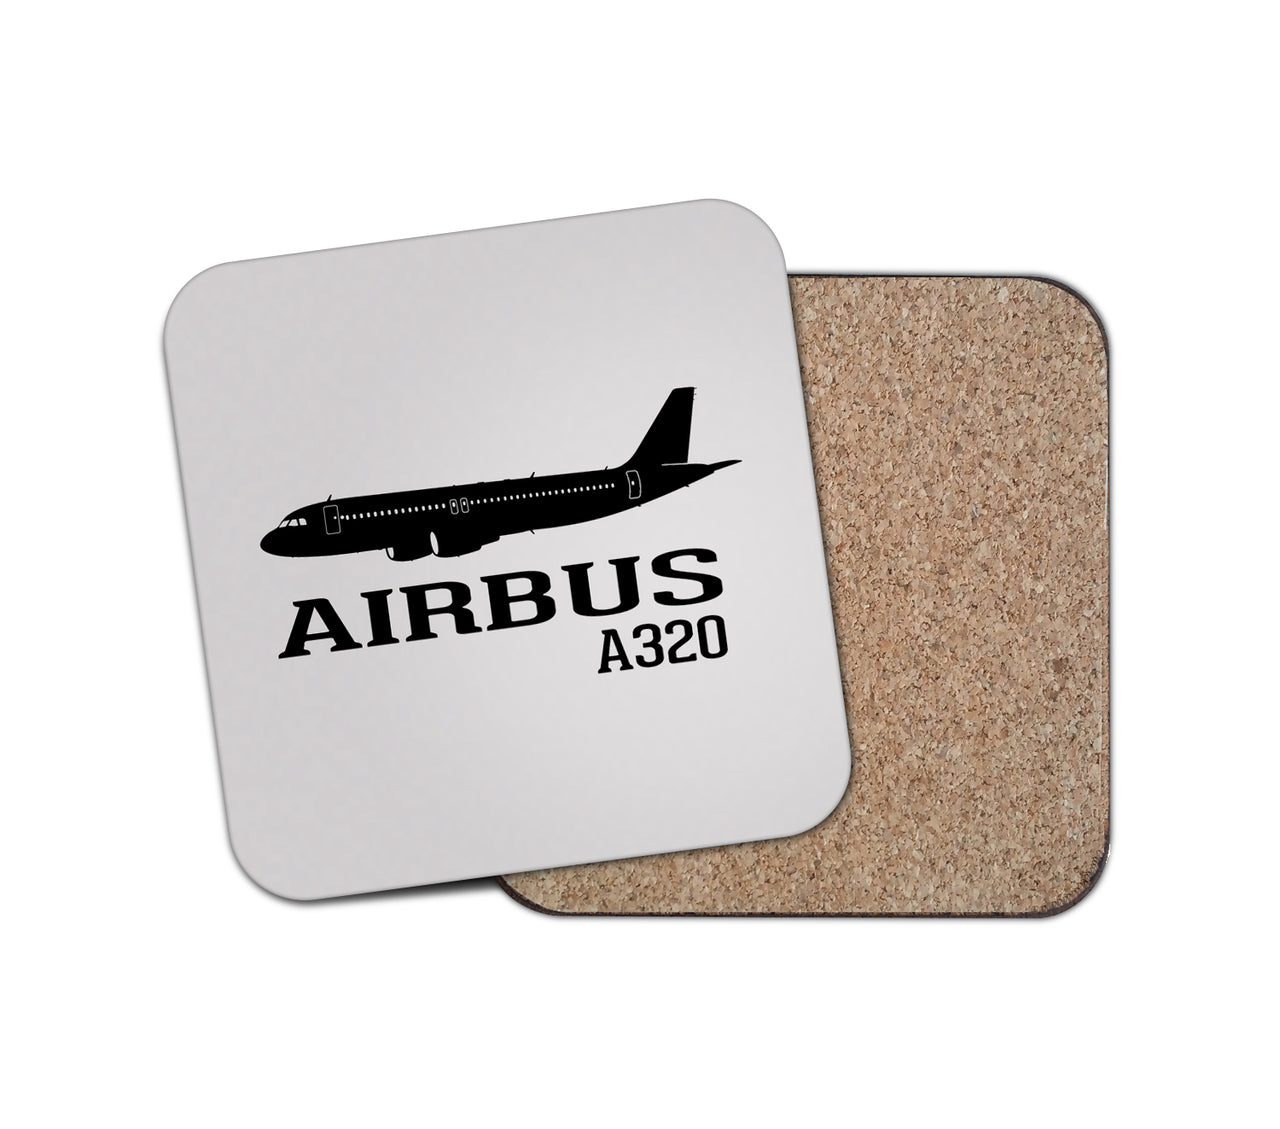 Airbus A320 Printed Designed Coasters